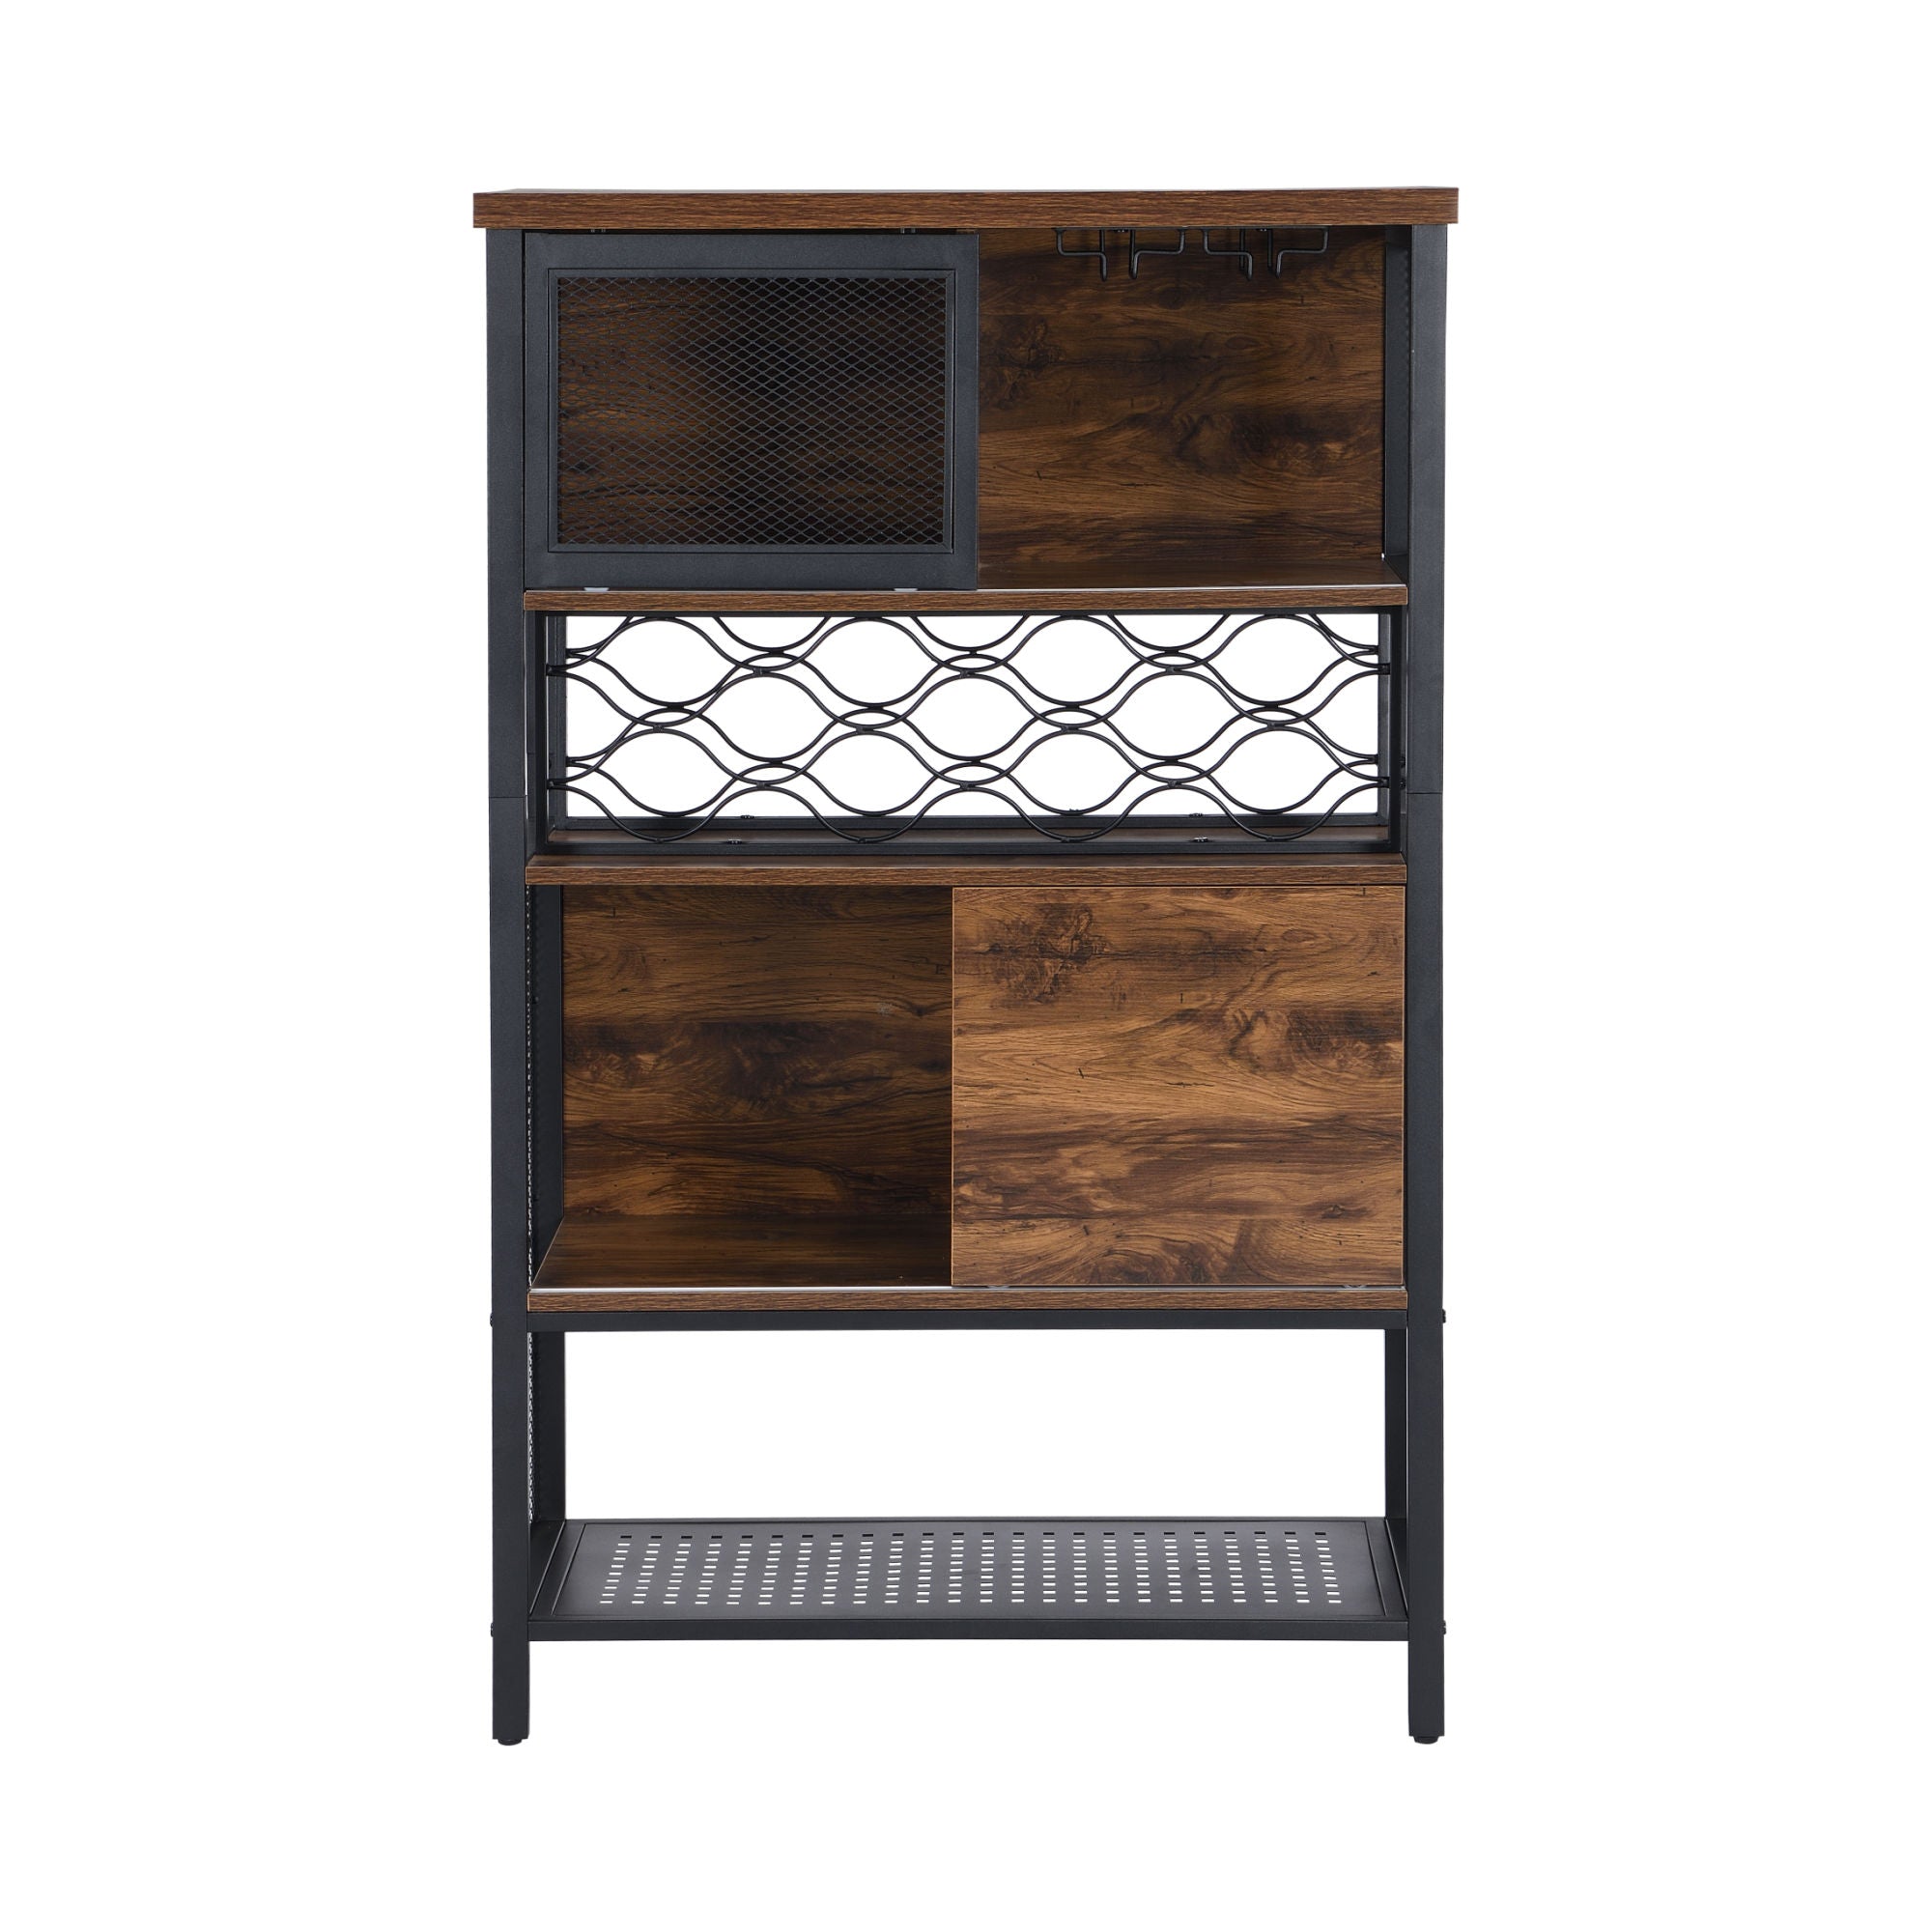 An Industrial Bar Cabinet with Wine Rack for Liquor and Glasses; Wood and Metal Cabinet for Home Kitchen Storage Cabinet with shelves.